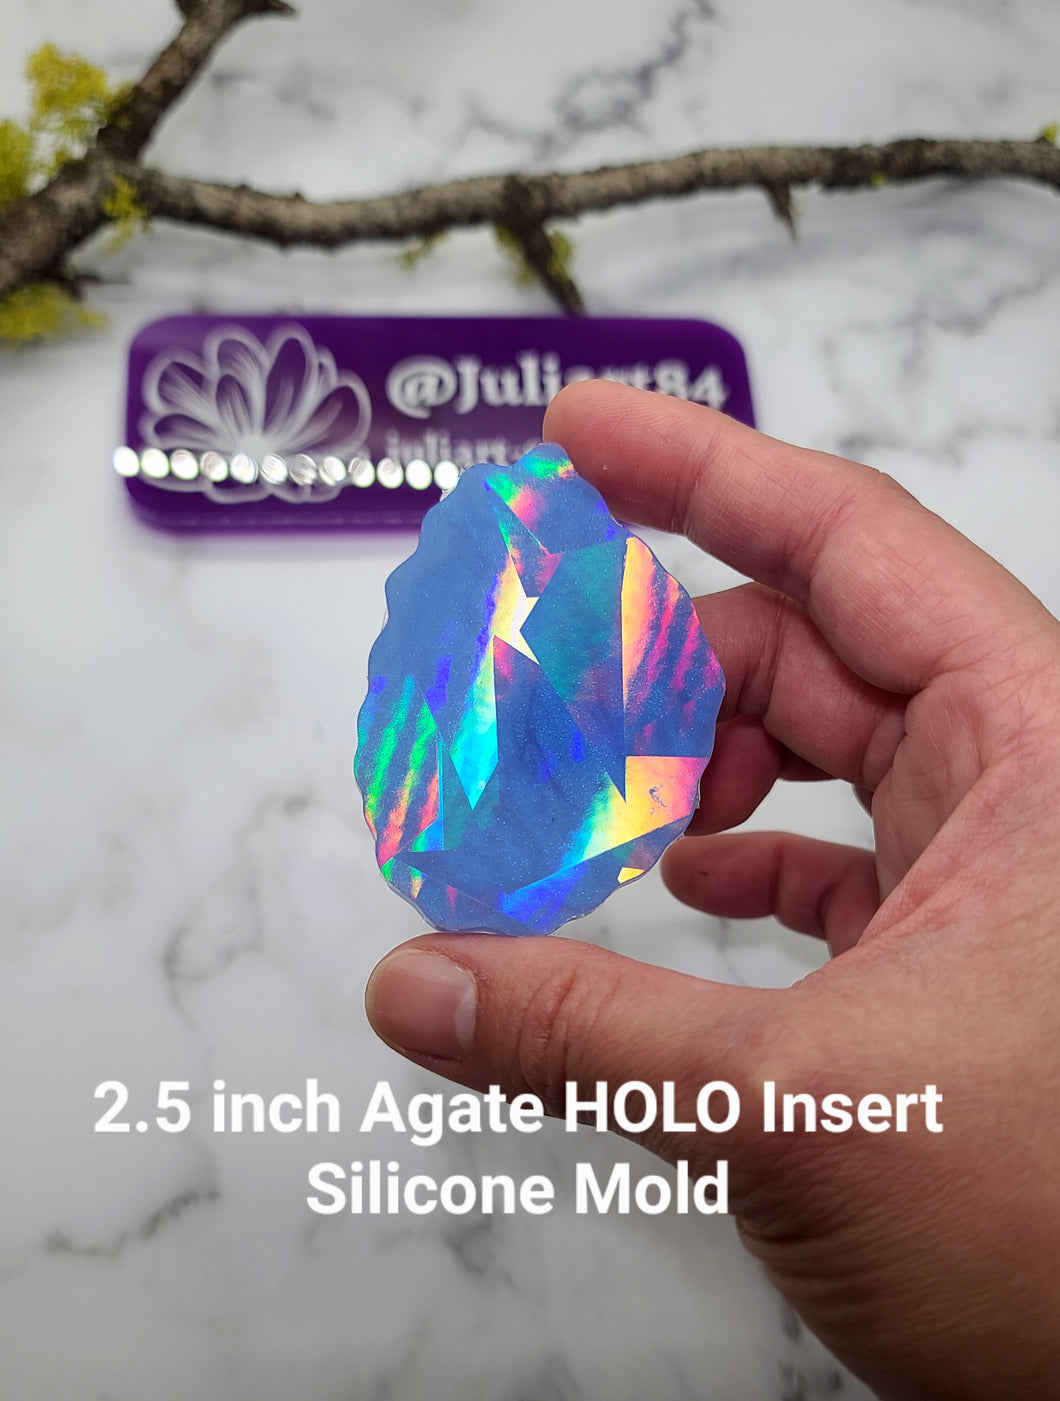 2.5 inch Agate HOLO Insert Silicone Mold for Resin